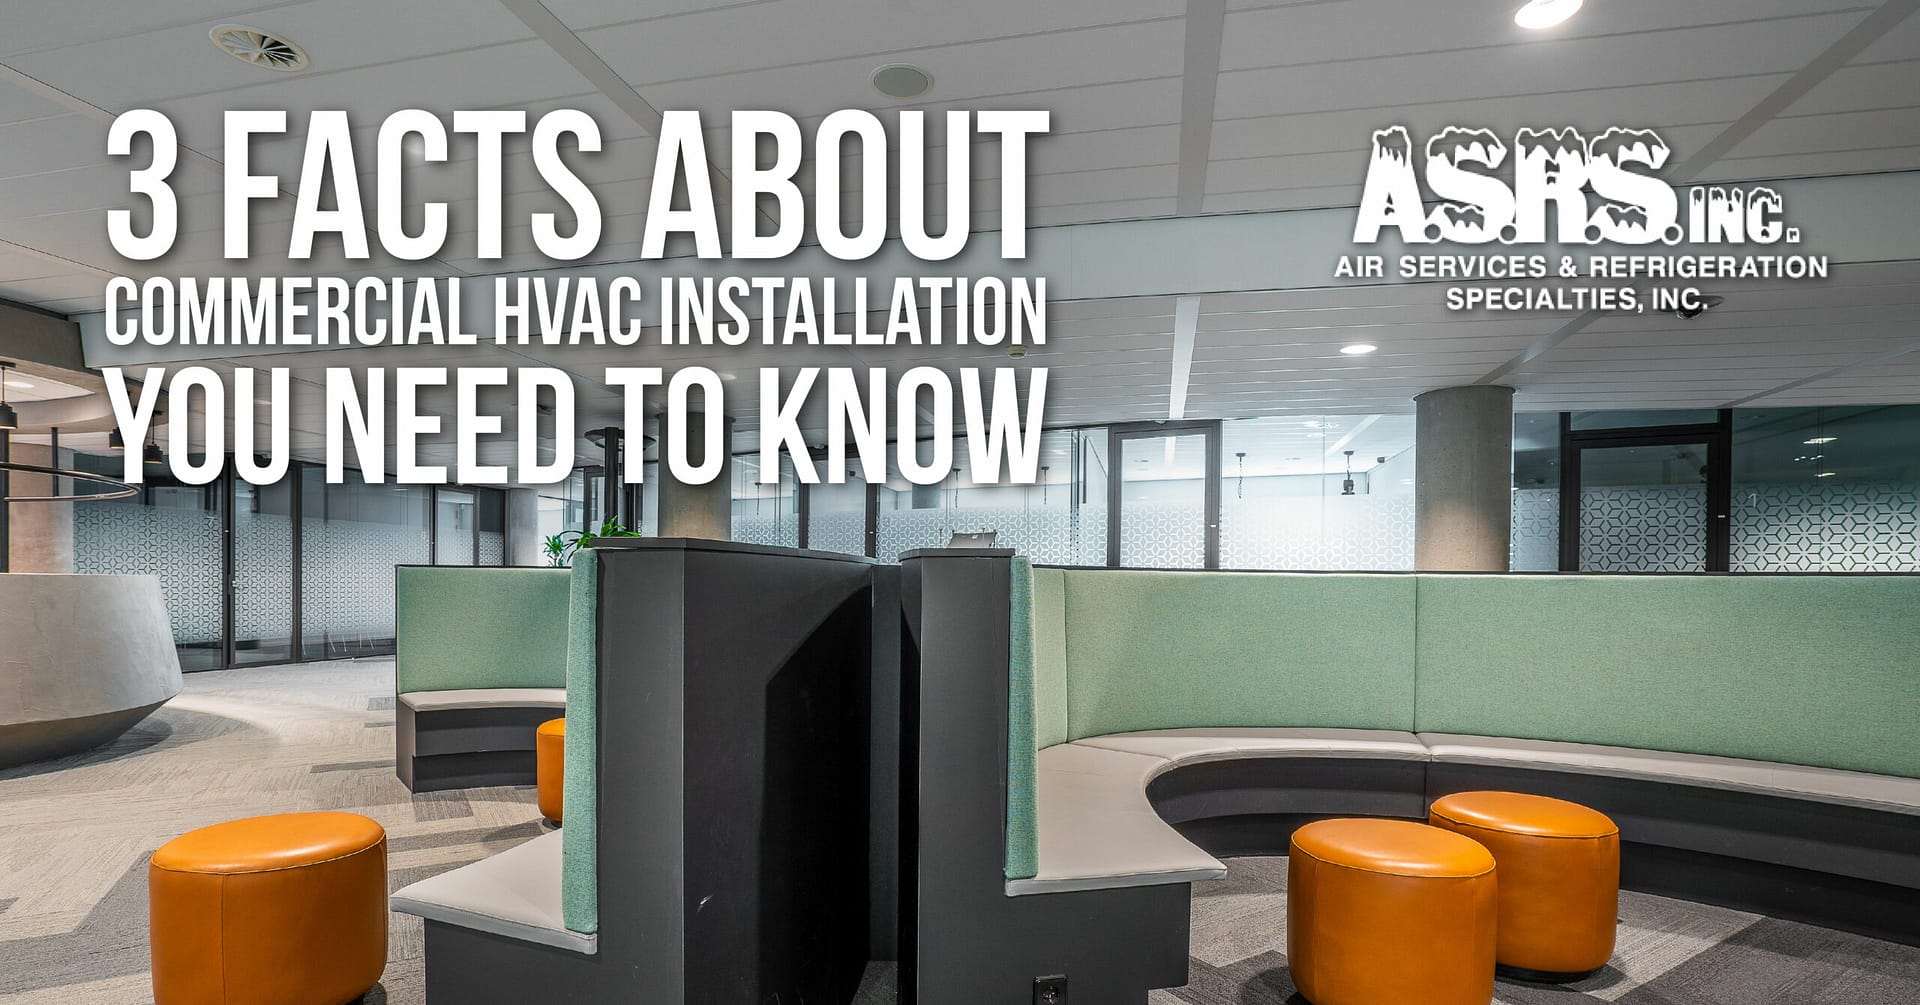 3 Facts About Commercial HVAC Installation | A.S.R.S.